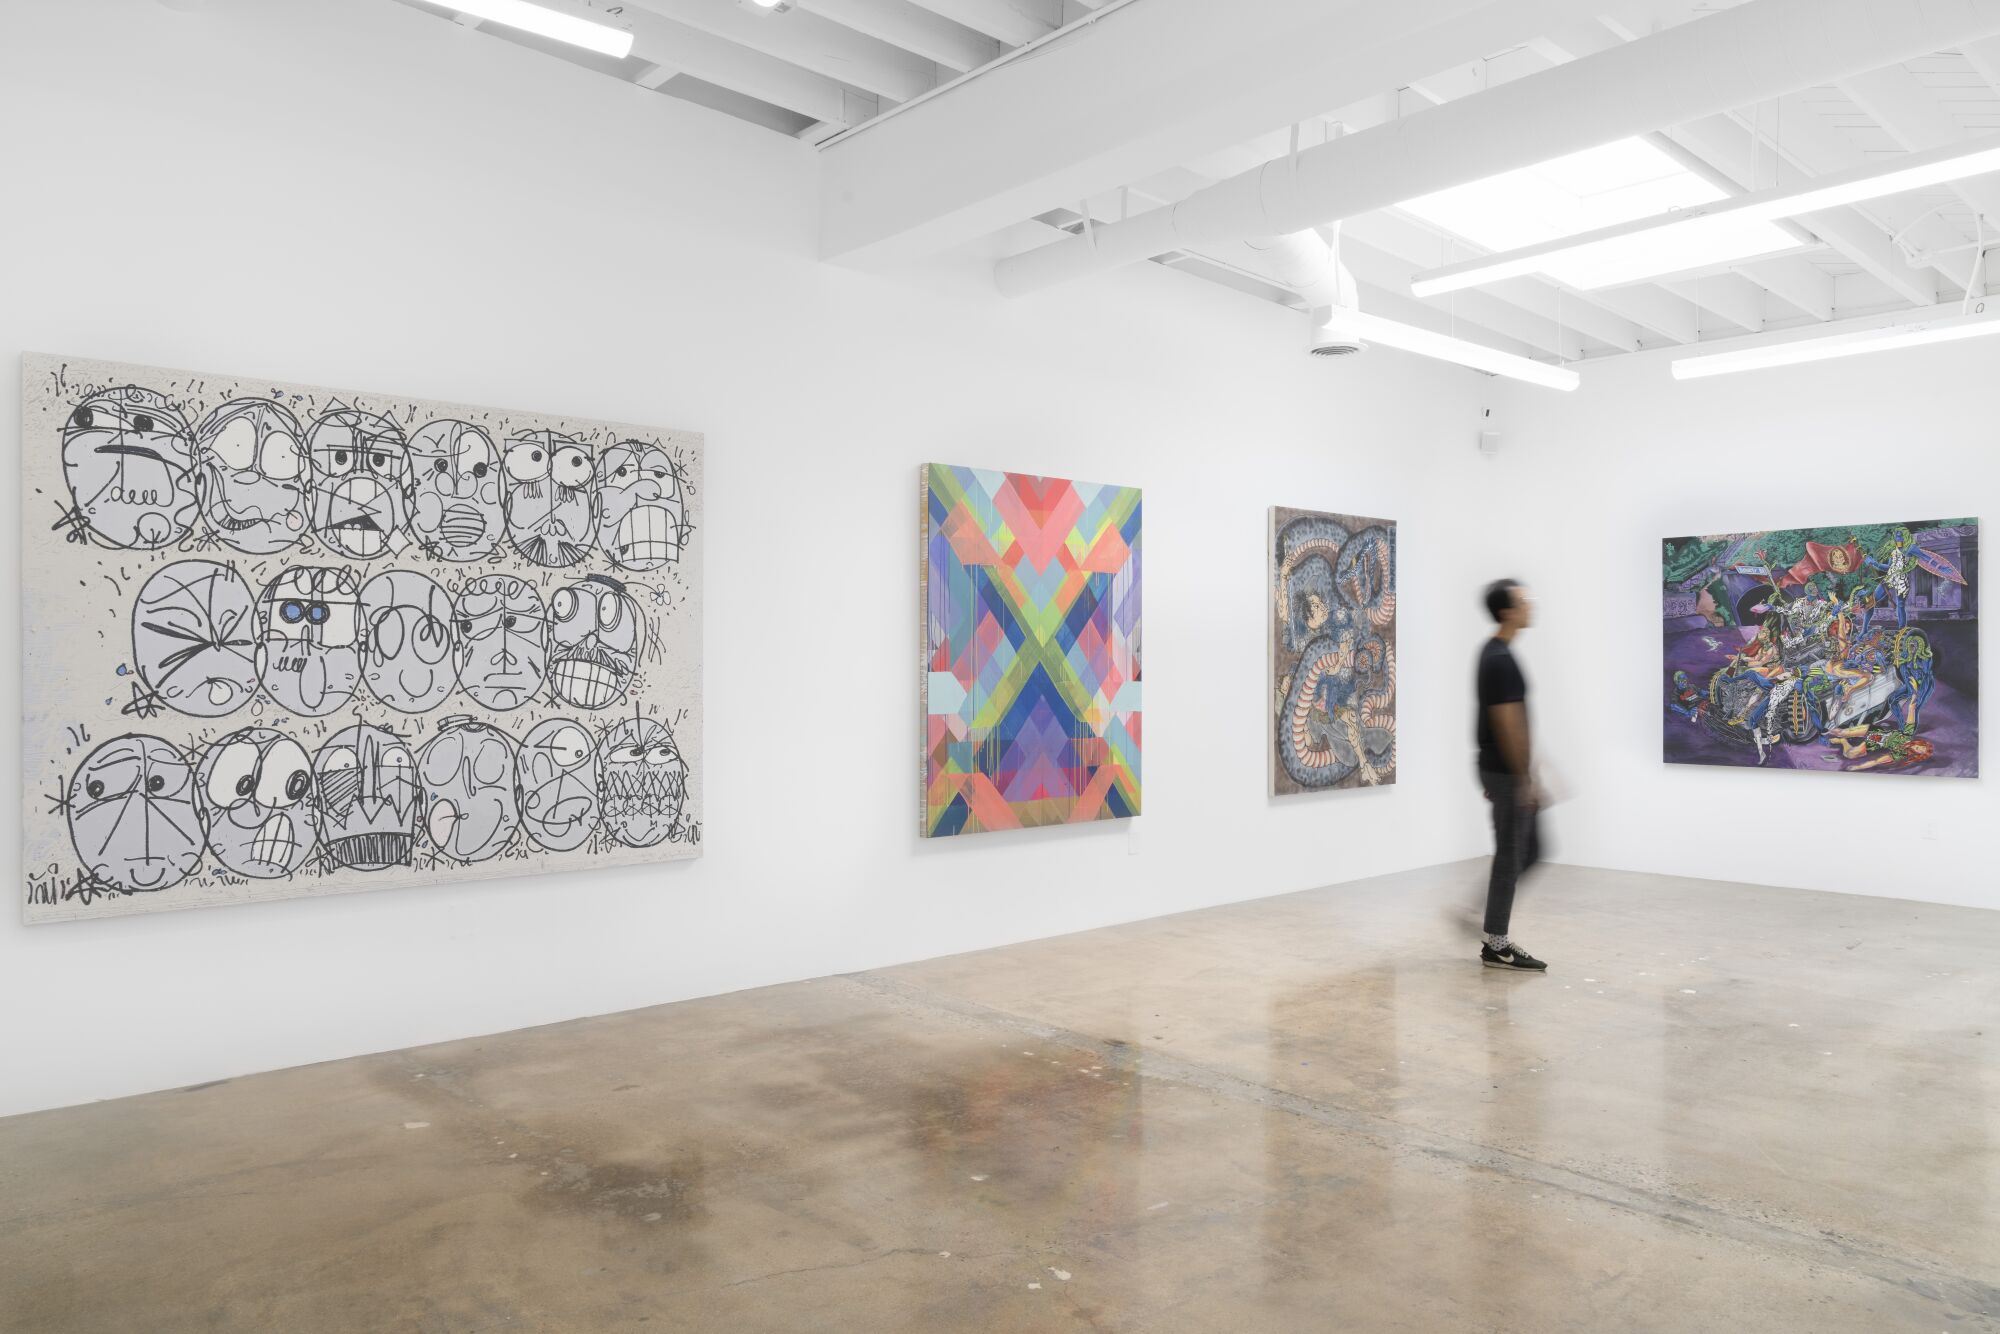 A blurry figure walks by four artworks hanging on the white walls of an open gallery space.